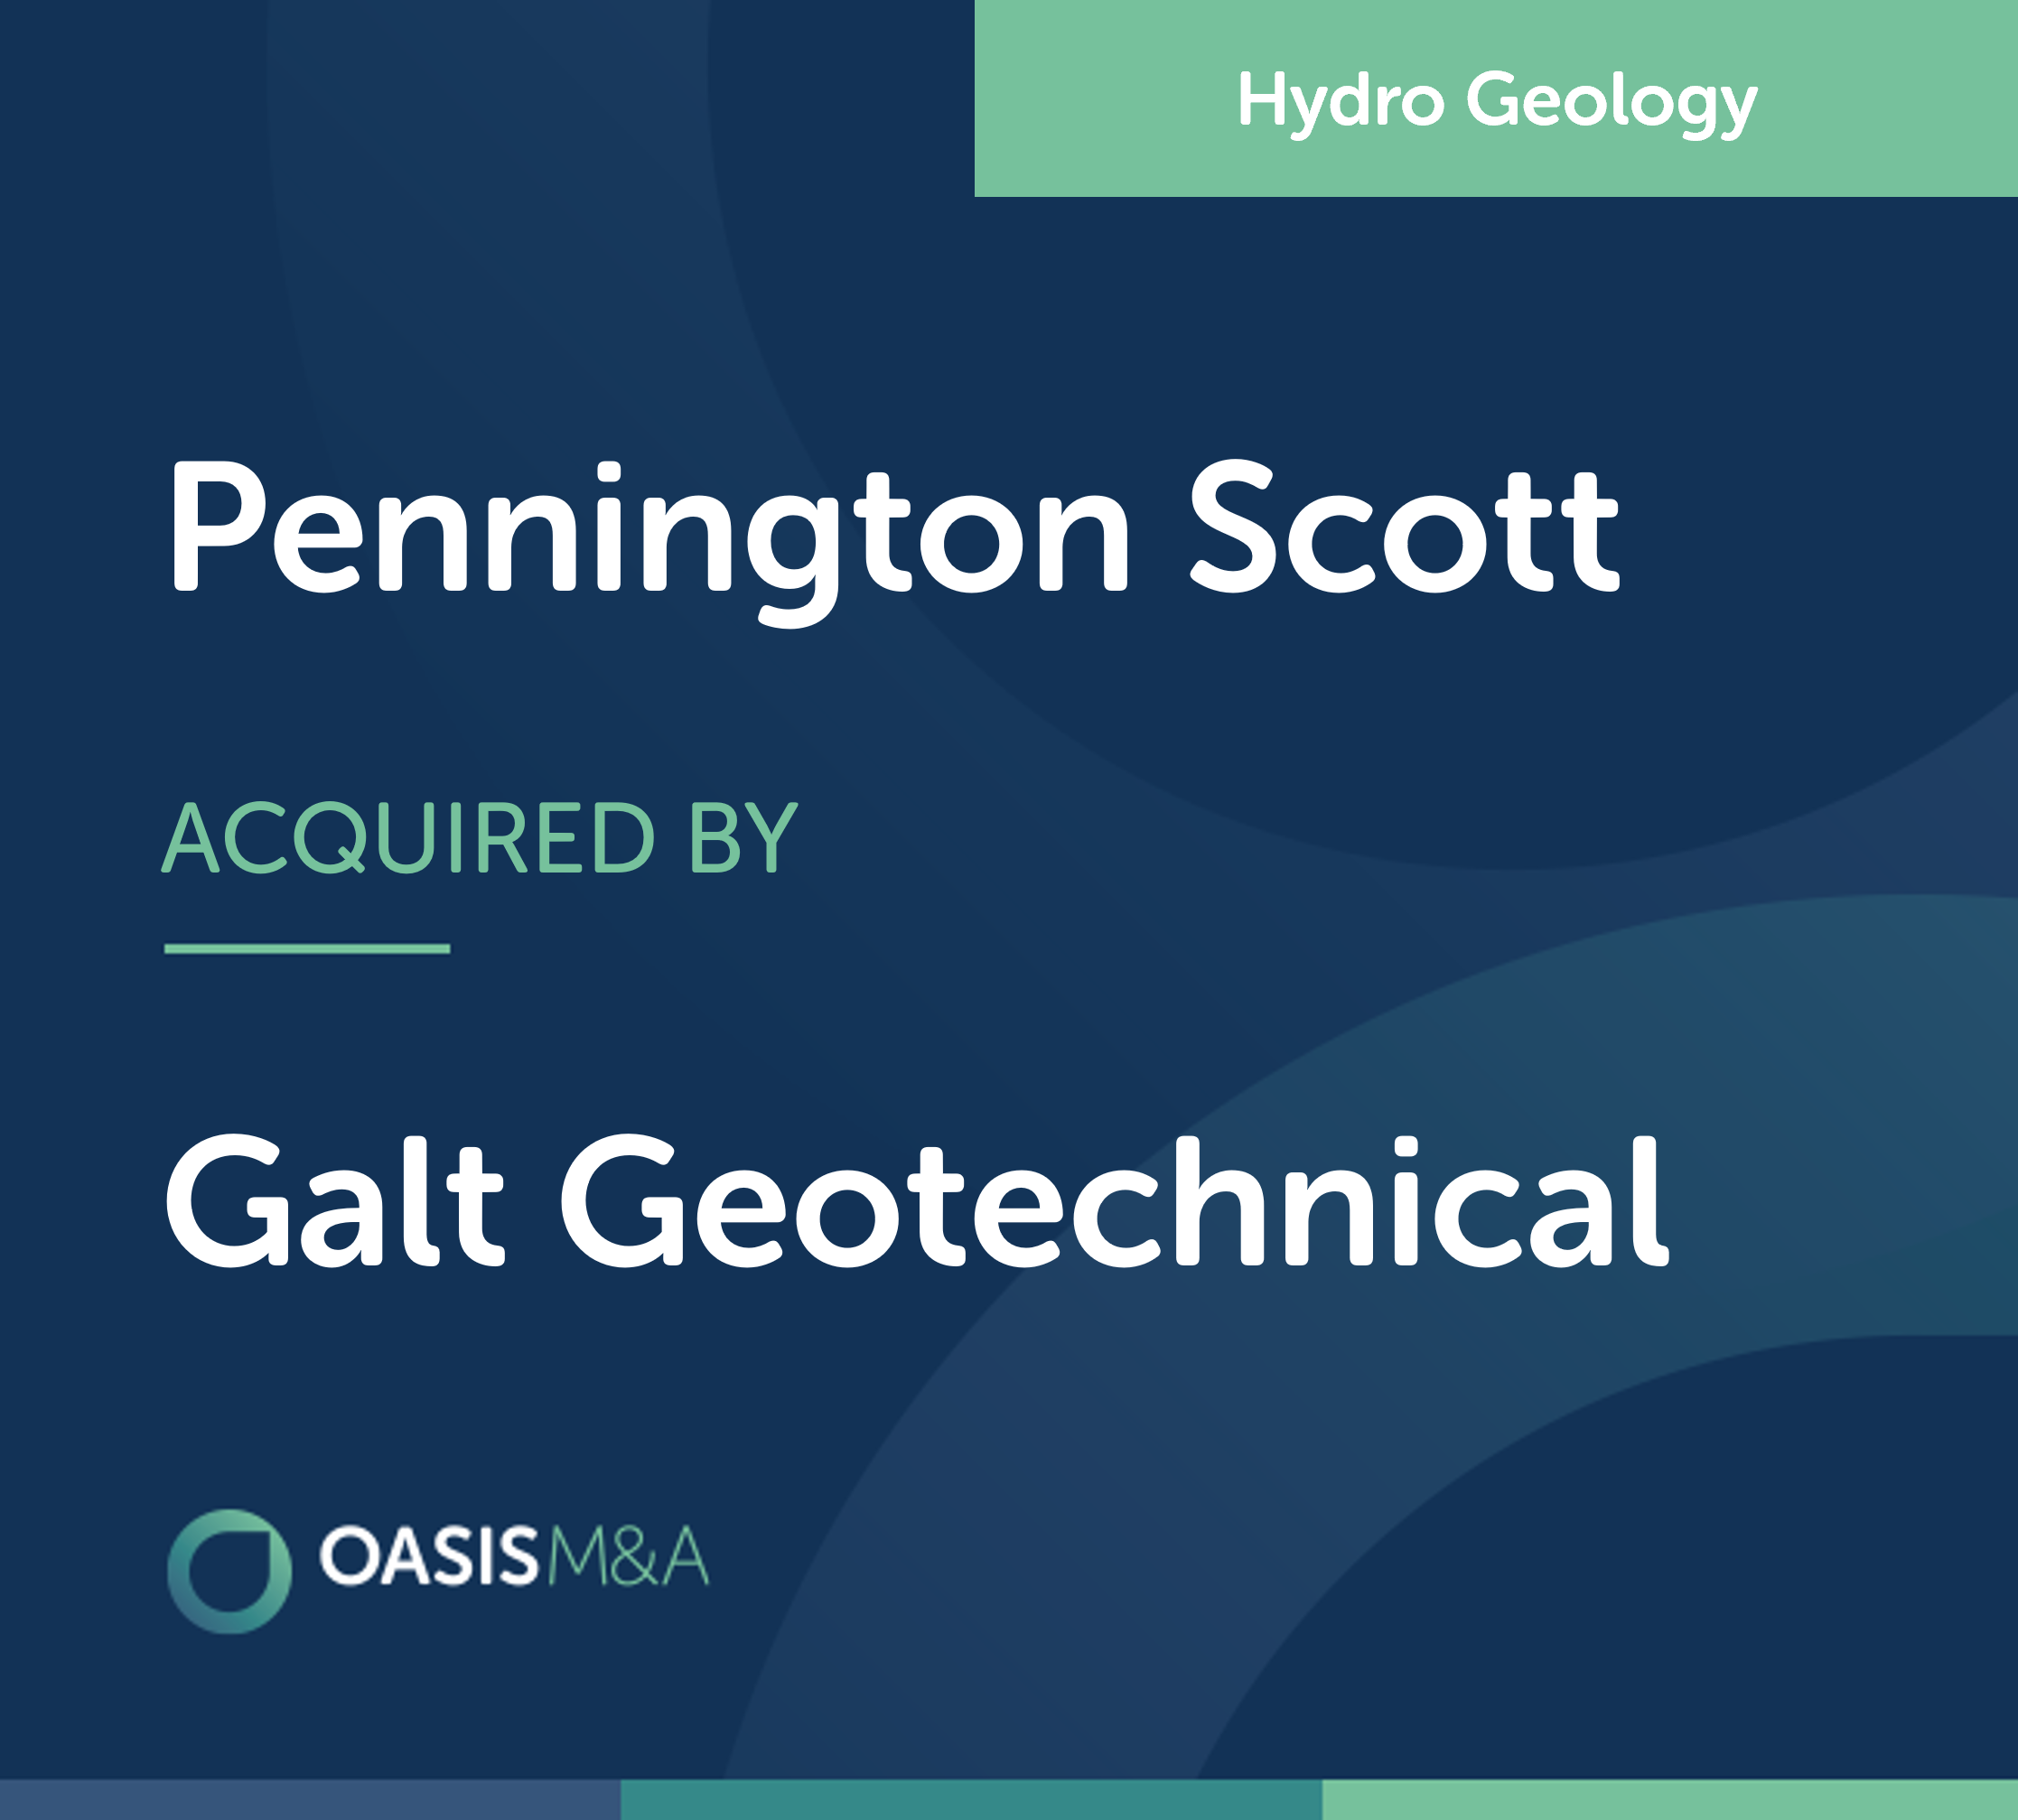 Pennington Scott acquired by Galt Geotechnical